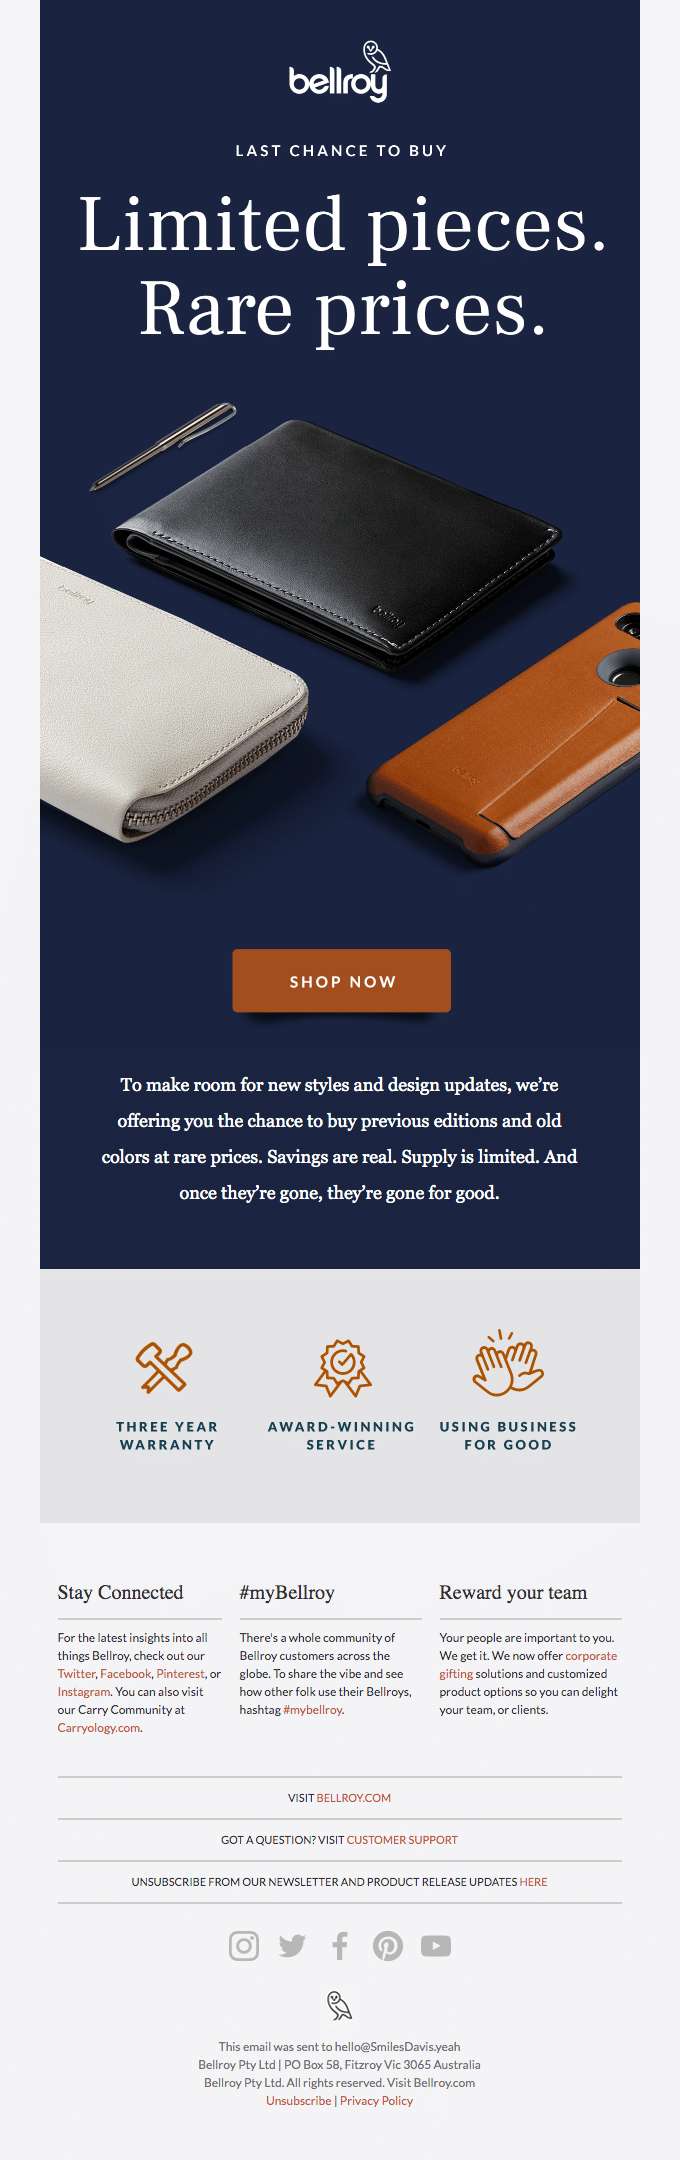 Bellroy Drip Email